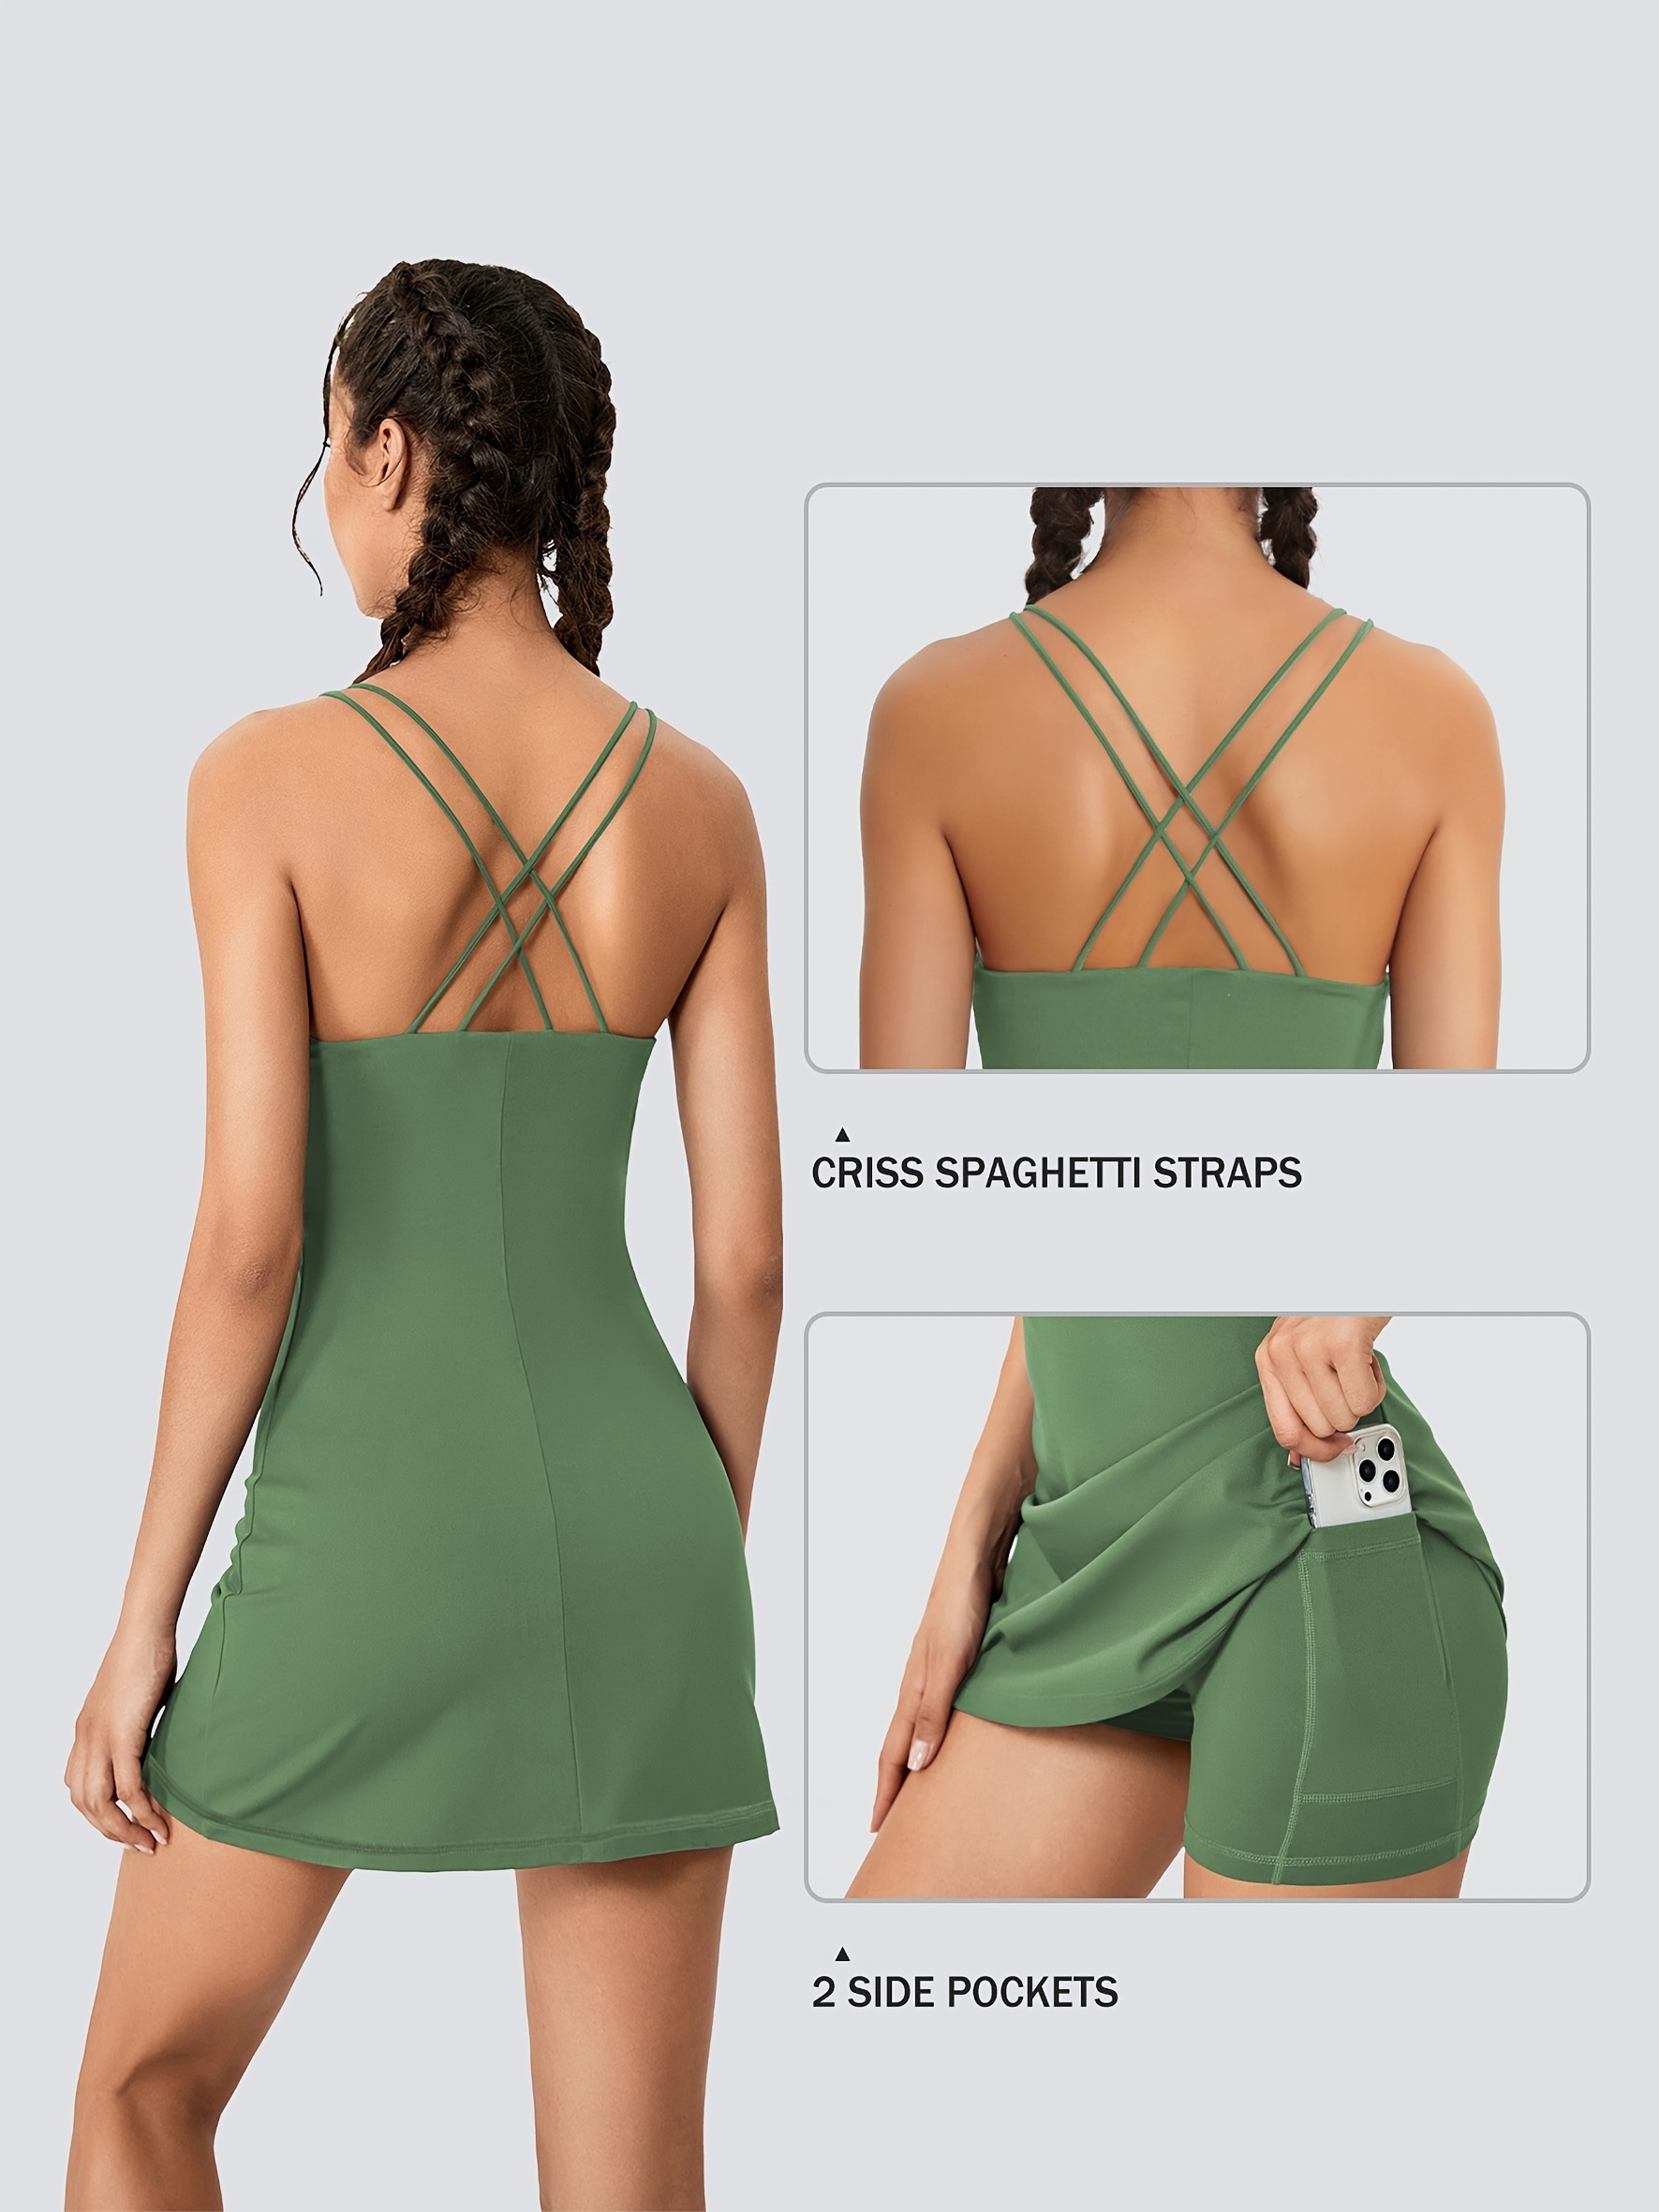 Workout tennis dress for women with built-in bra shorts